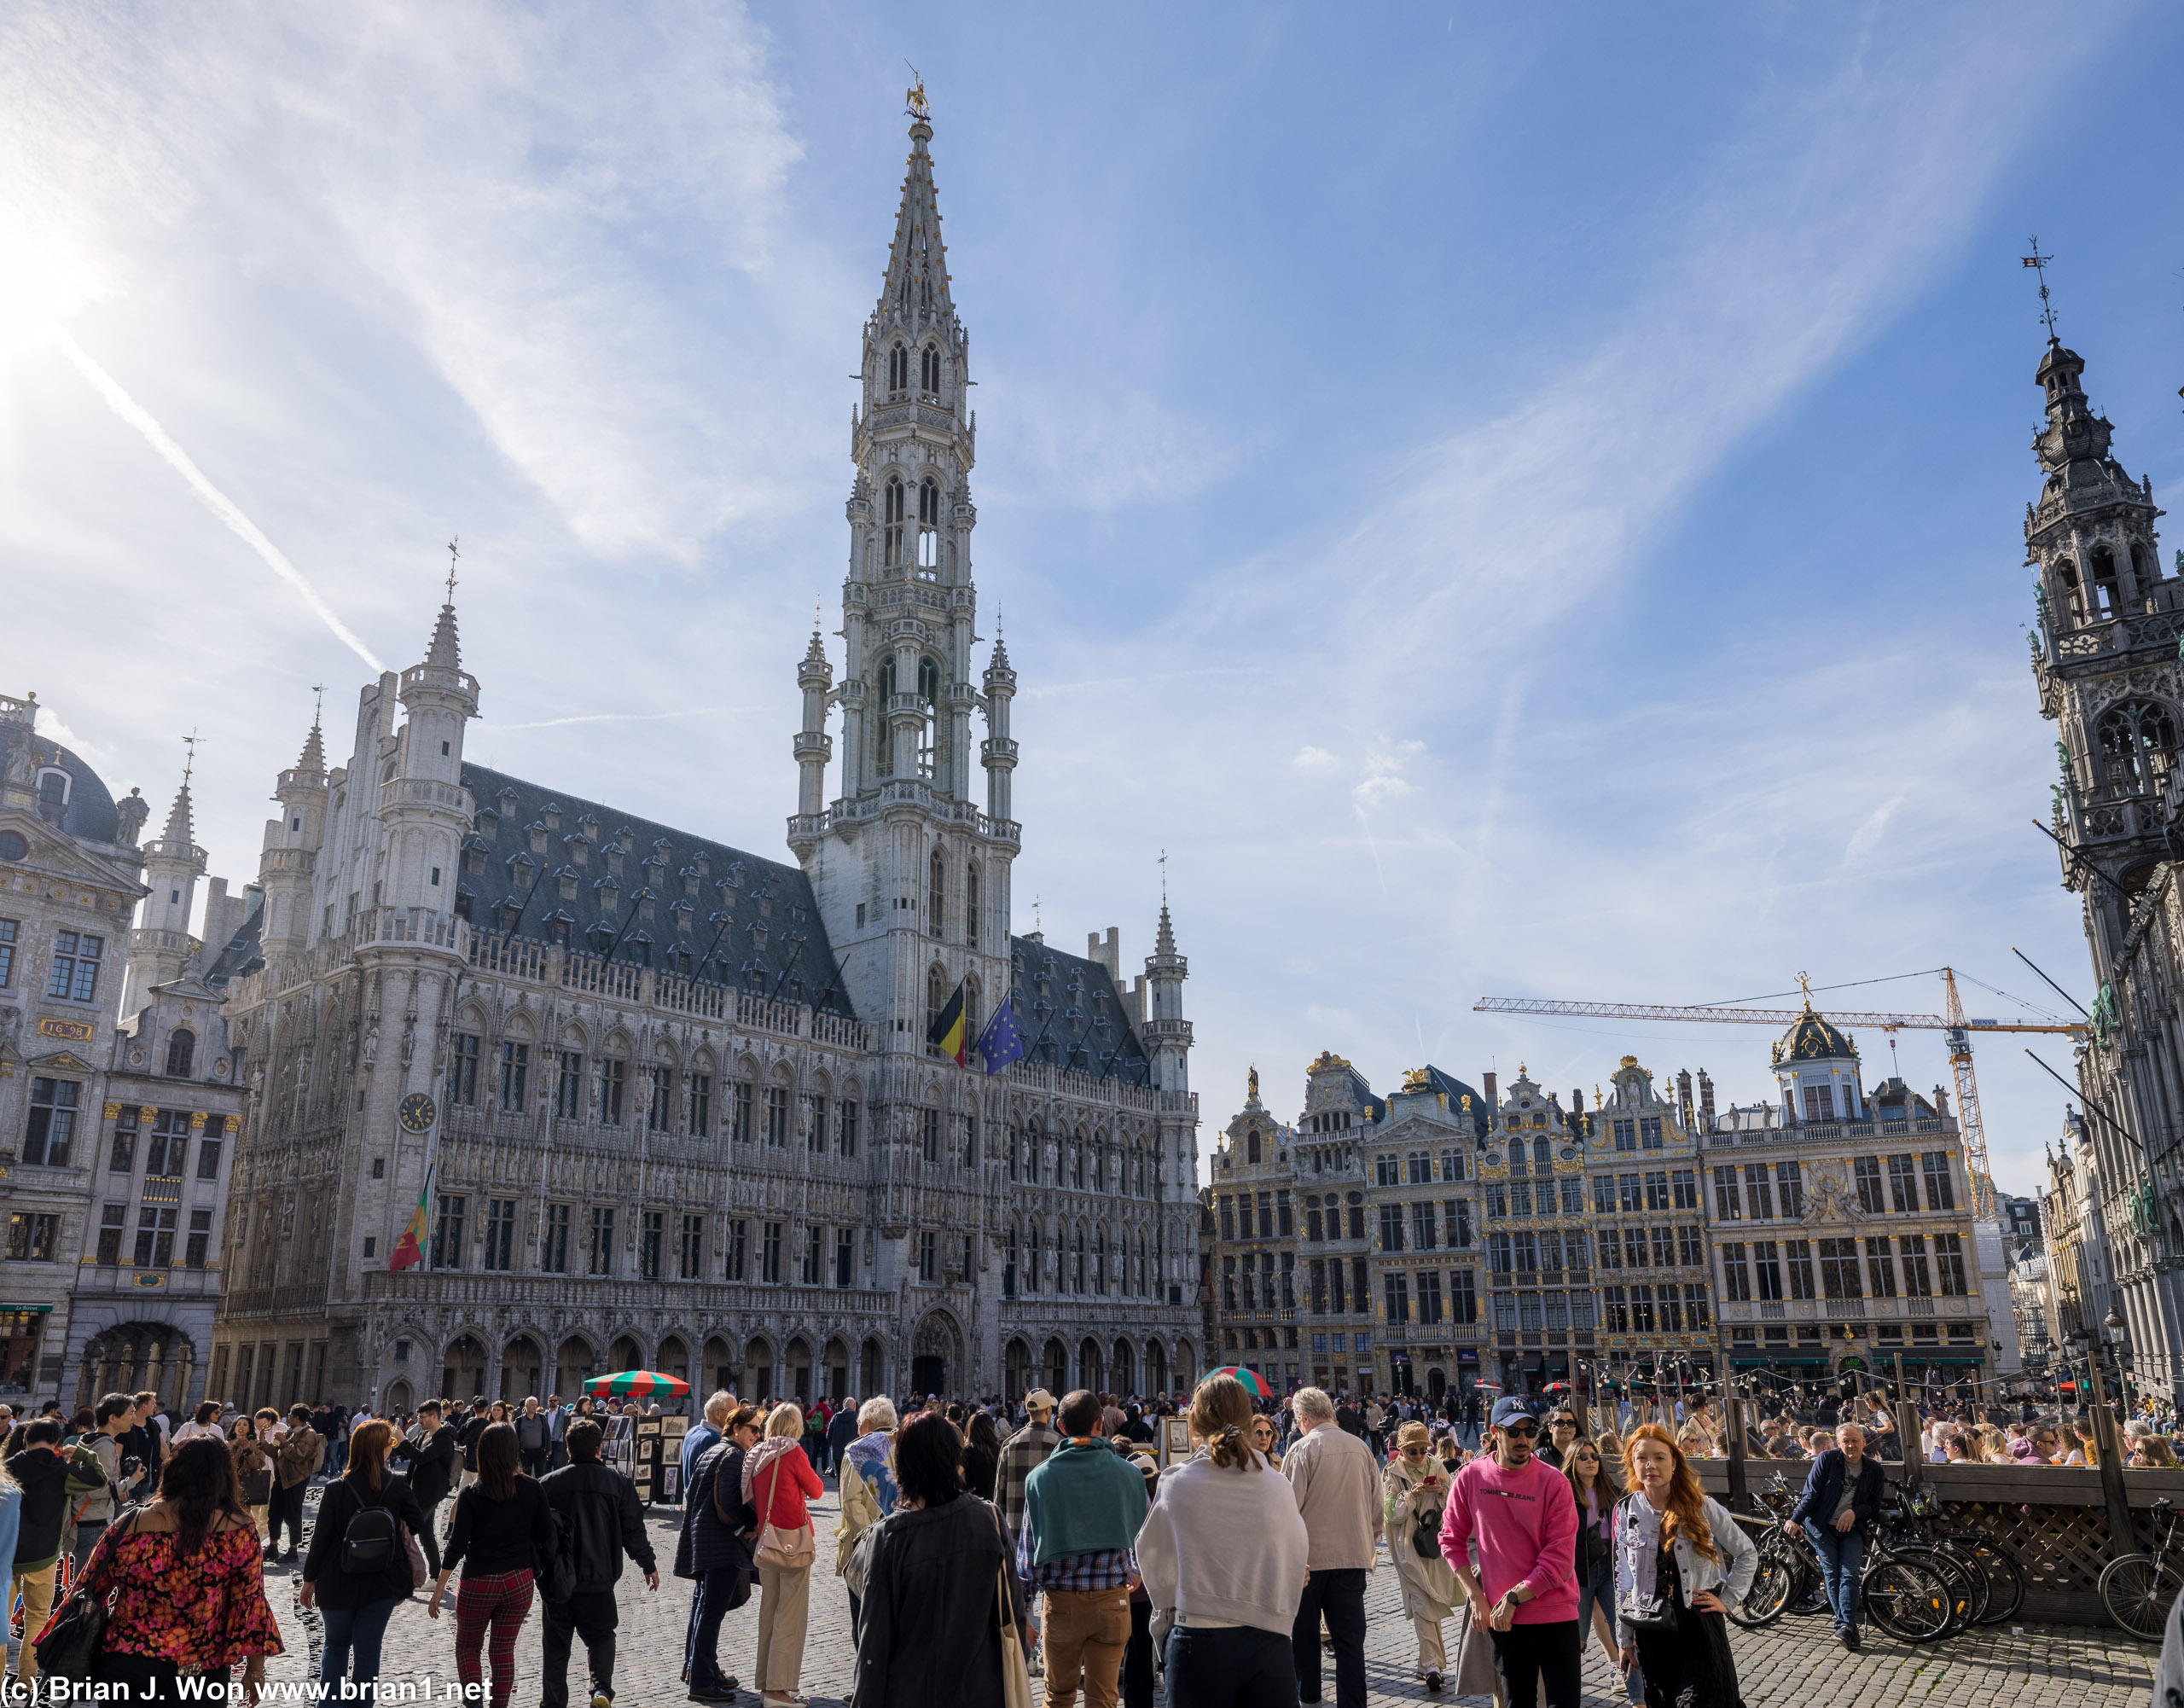 Brussels Town Hall with the tall spire.